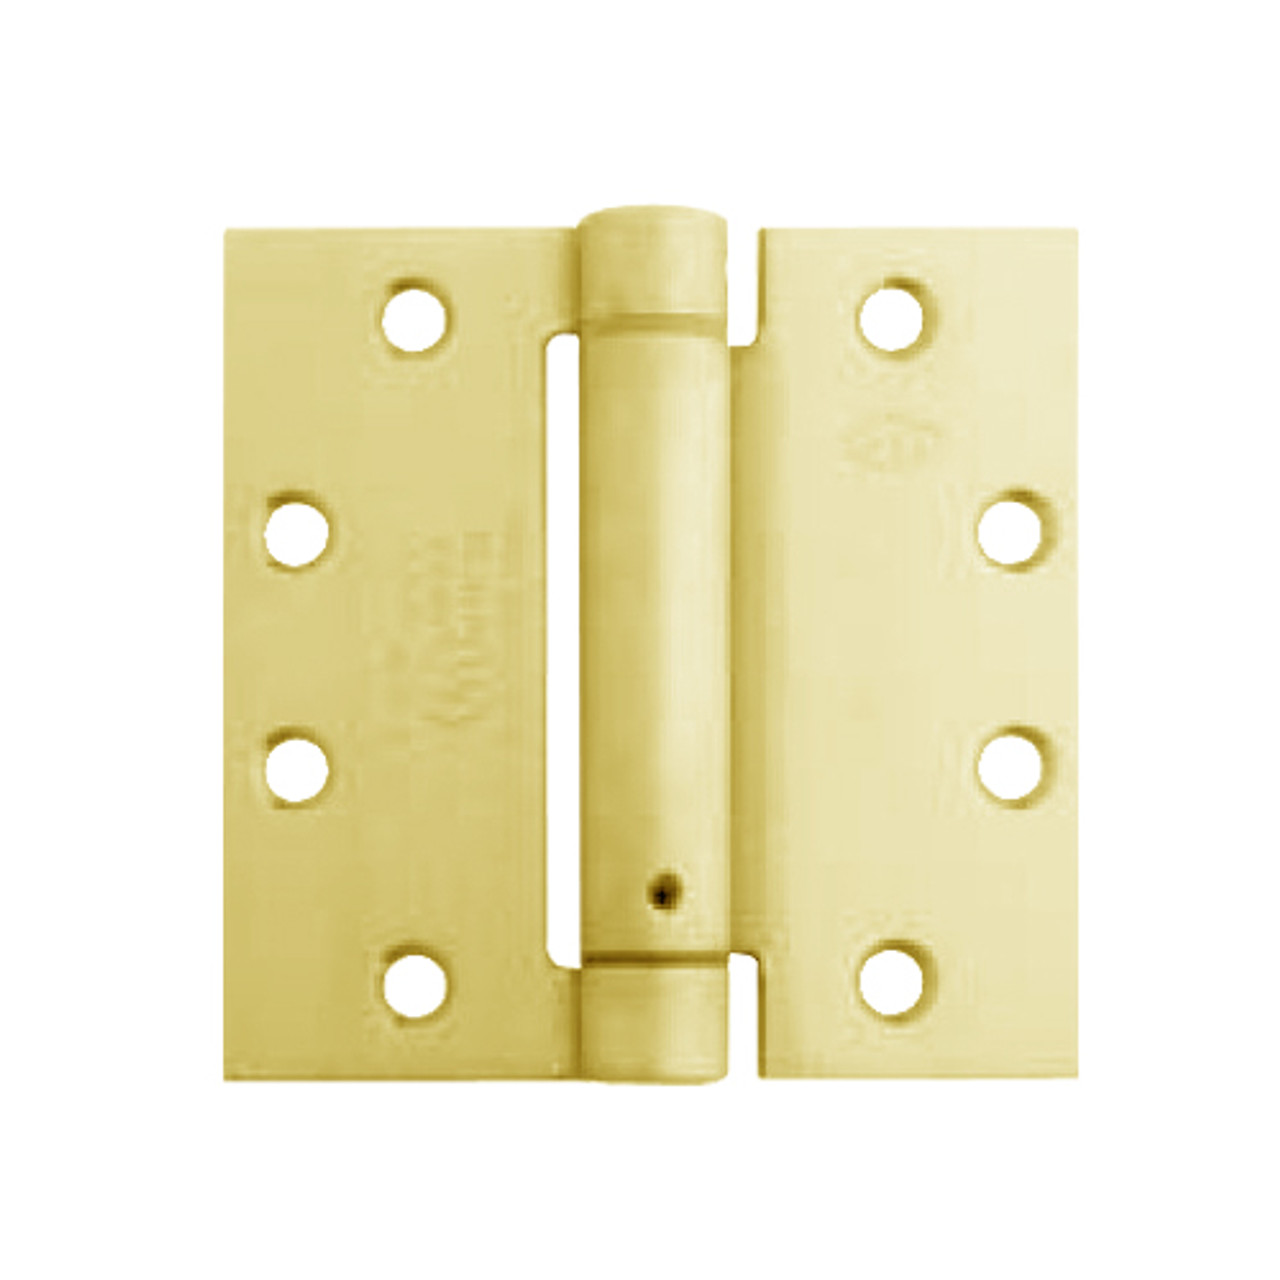 3SP1-4-5x4-5-632 IVES 3 Knuckle Spring Full Mortise Hinge in Bright Brass Plated